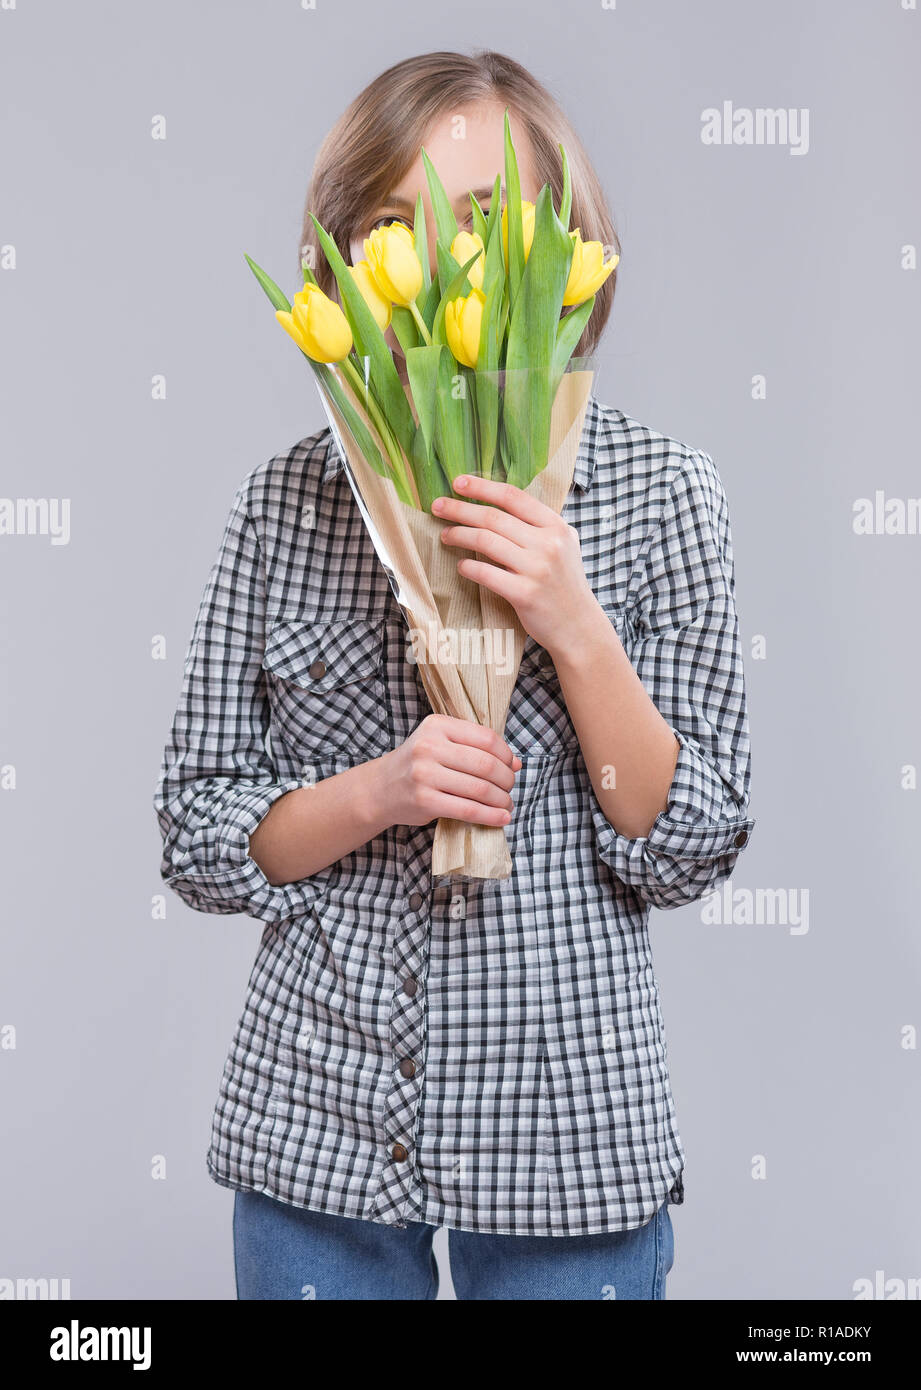 Teen girl with flowers Stock Photo